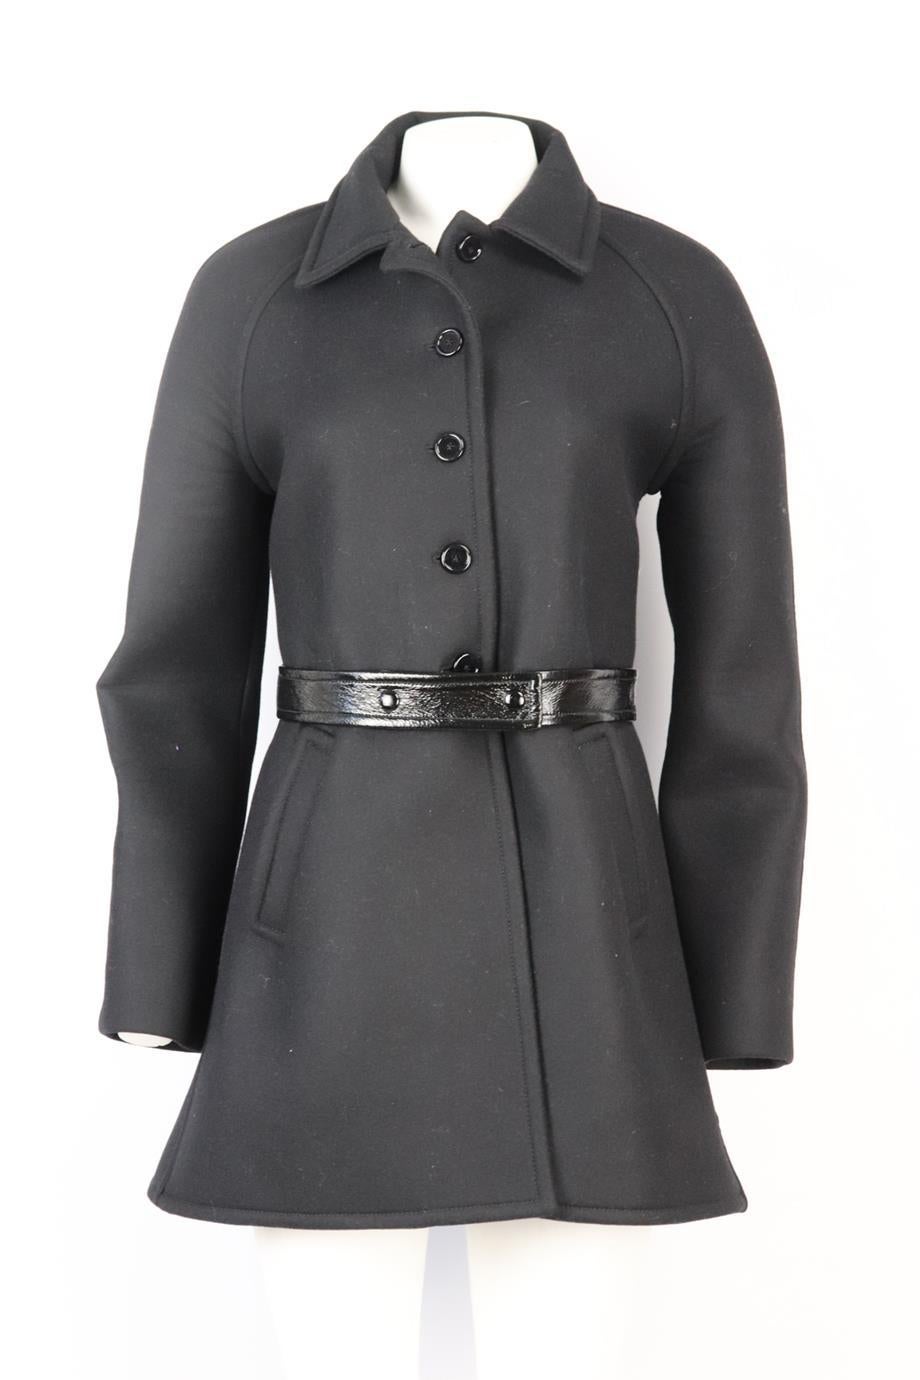 Courrēges belted leather trimmed wool blend coat. Black. Long sleeve, crewneck. Button fastening at front. 48% Wool, 20% polyester, 20% polyurethane, 12% nylon; lining: 80% wool, 20% nylon; lining2: 88% cotton, 10% polyurethane, 2% elastane. Size: